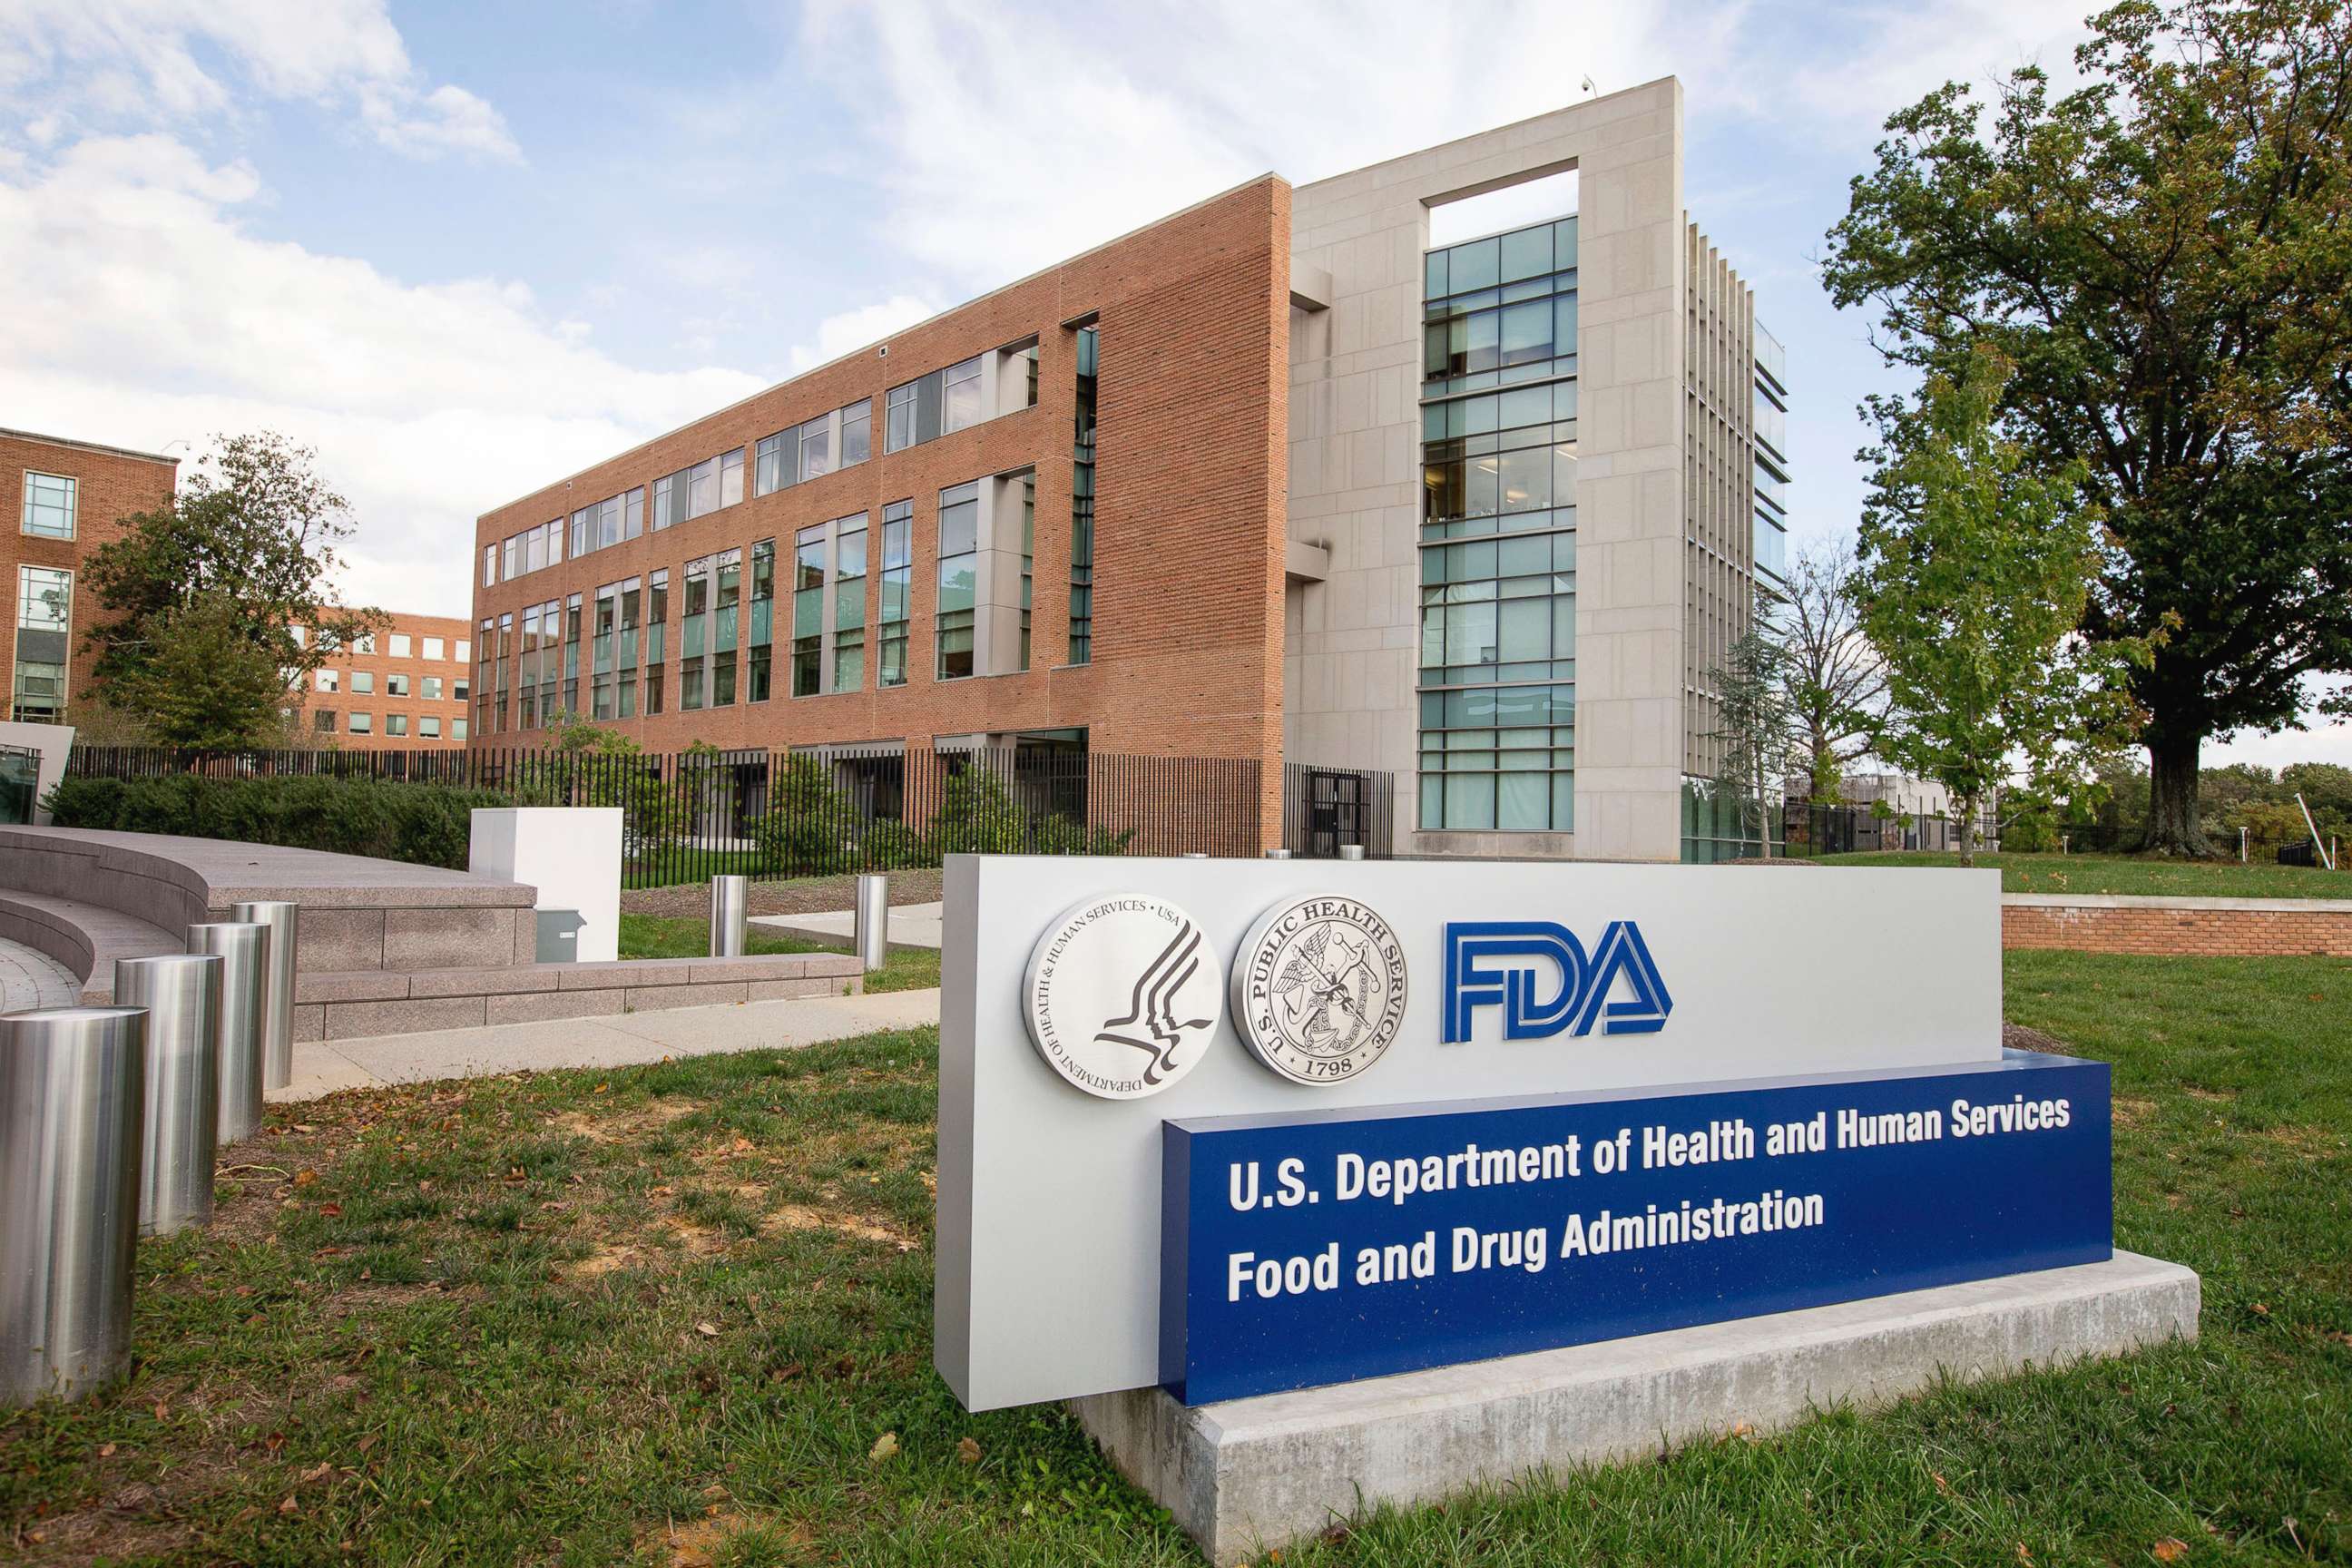 PHOTO: The U.S. Food & Drug Administration campus in Silver Spring, Md seen Oct. 14, 2015.  